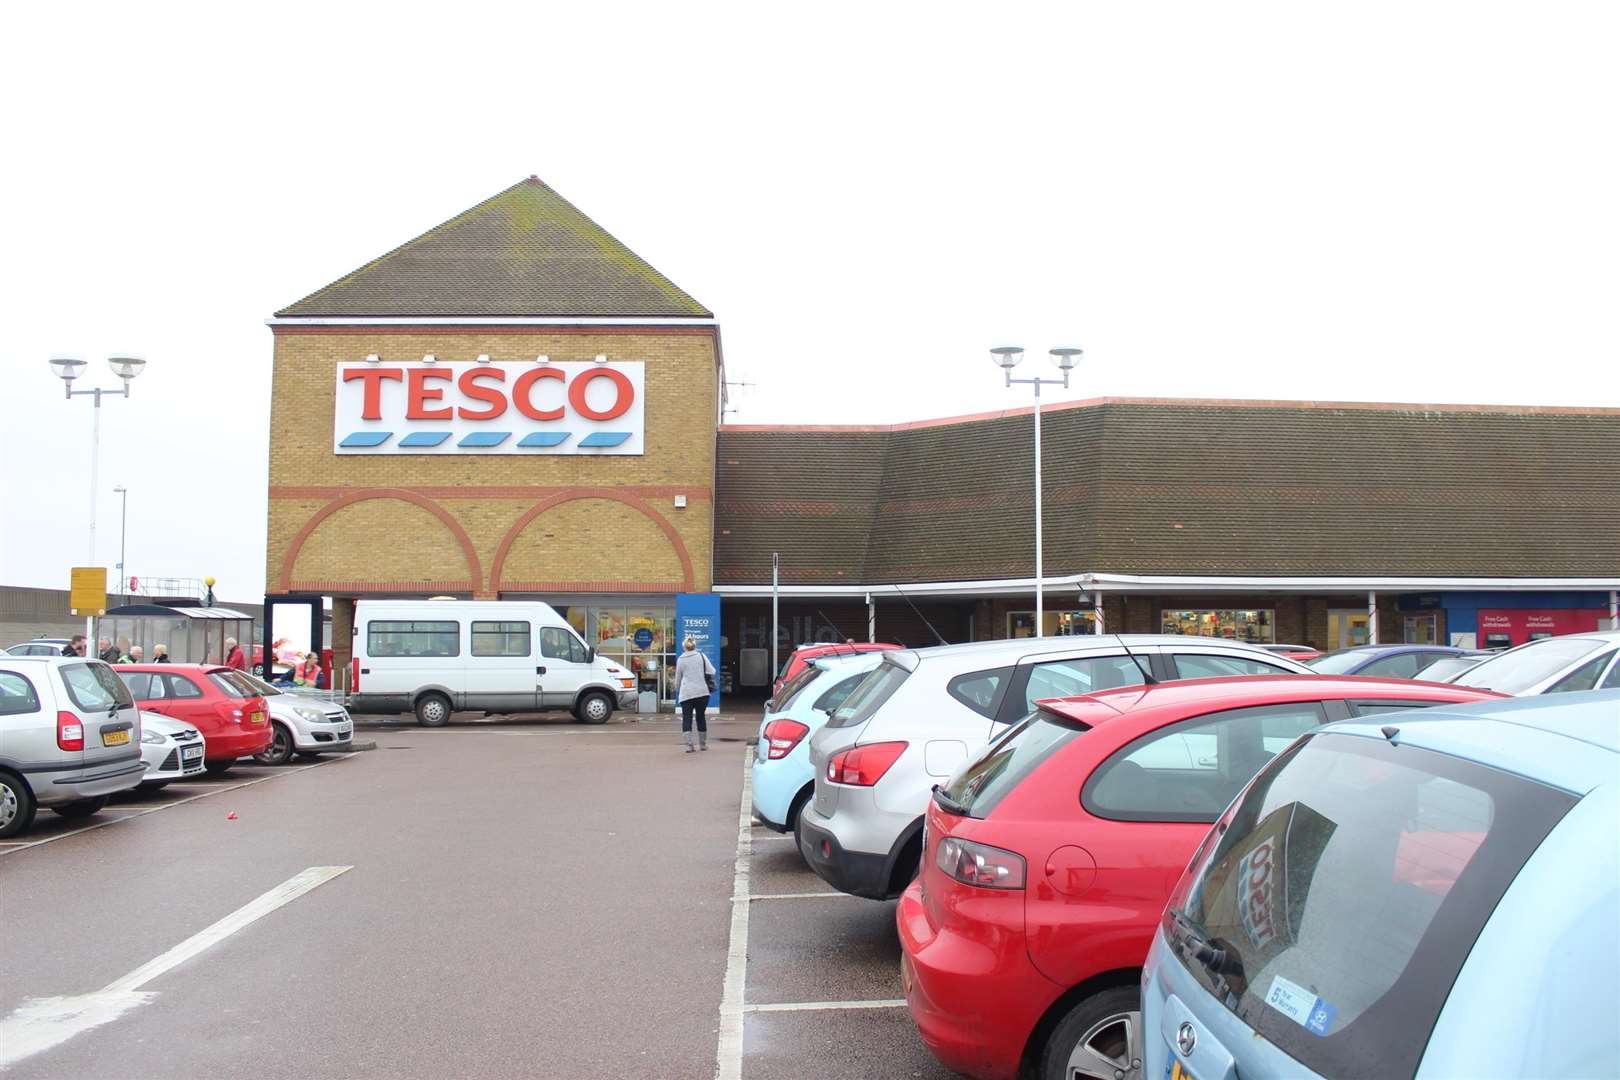 Ashley Cobb attacked Charlene Gibbard in her car outside Tesco in Sheerness